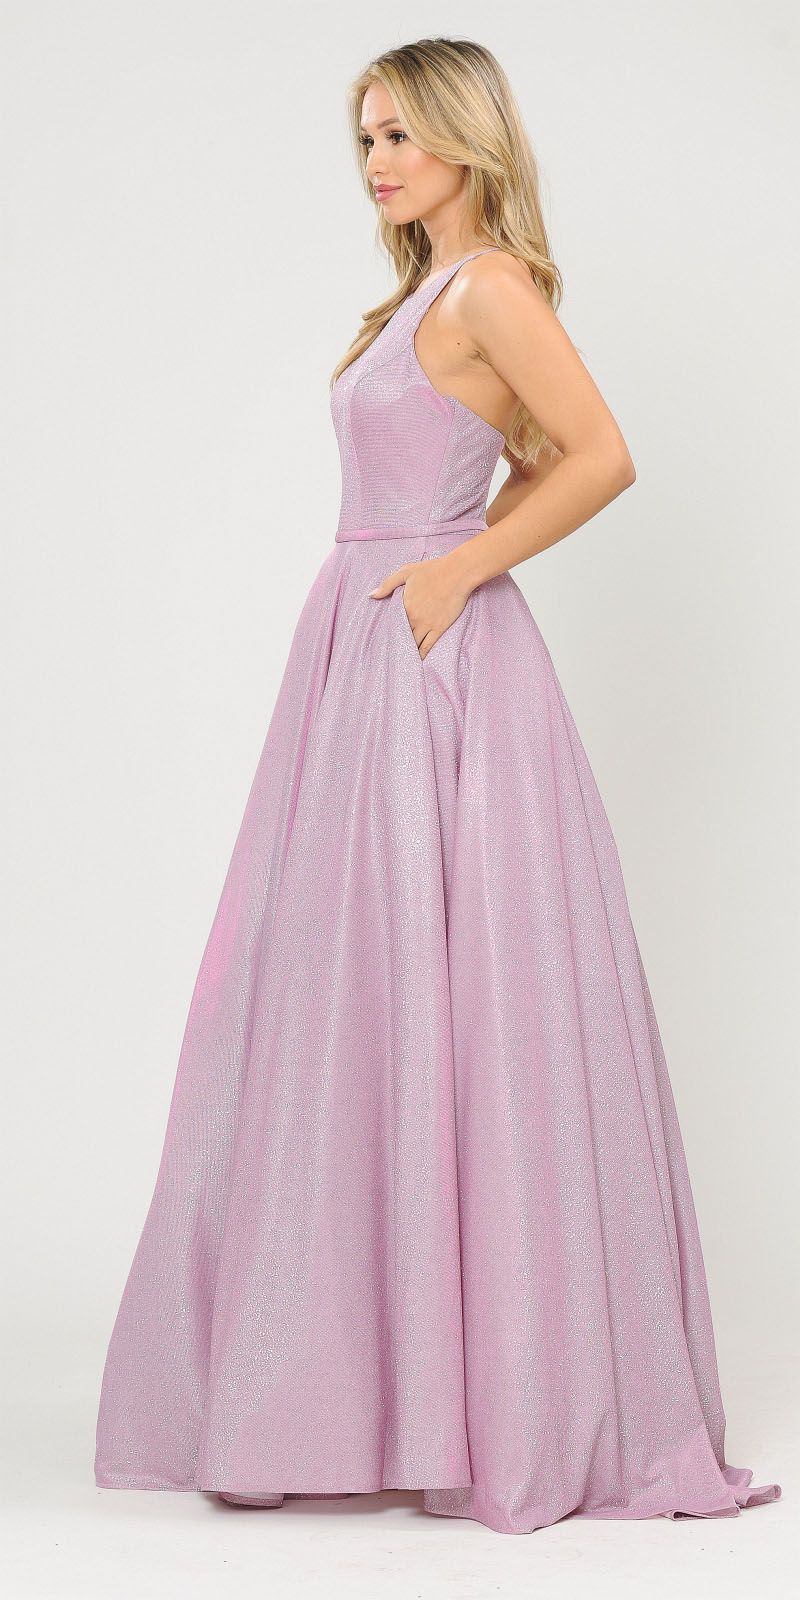 Pink/Lilac Long Prom Dress with Criss-Cross Back and Pockets